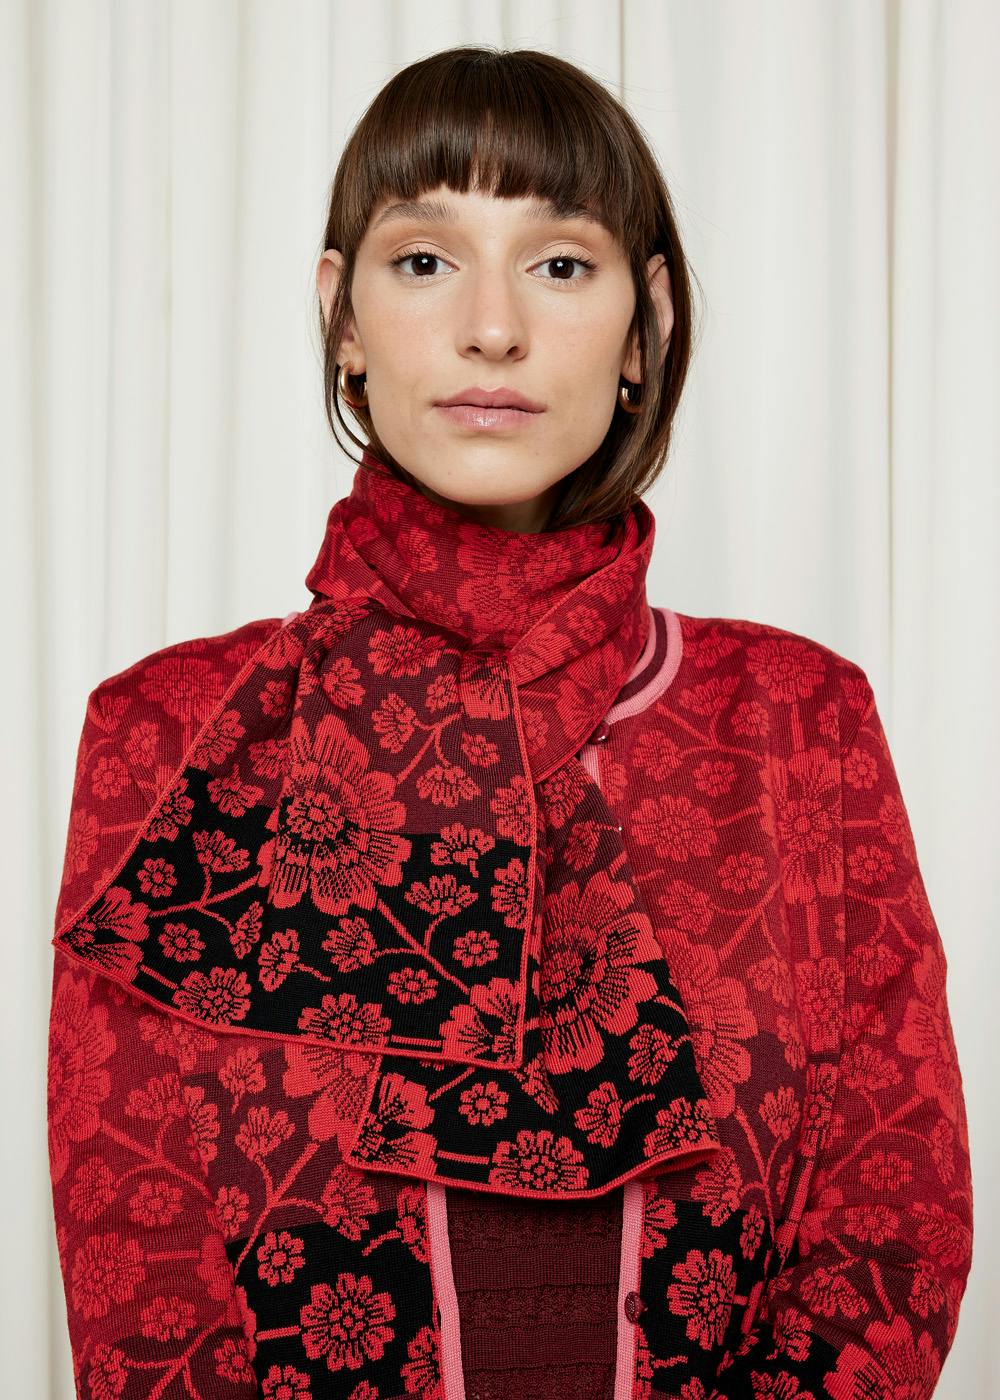 Oleana Heritage collection – Soft scarf with floral motif in red merino wool. Matching knitted cardigan. Made in Norway.